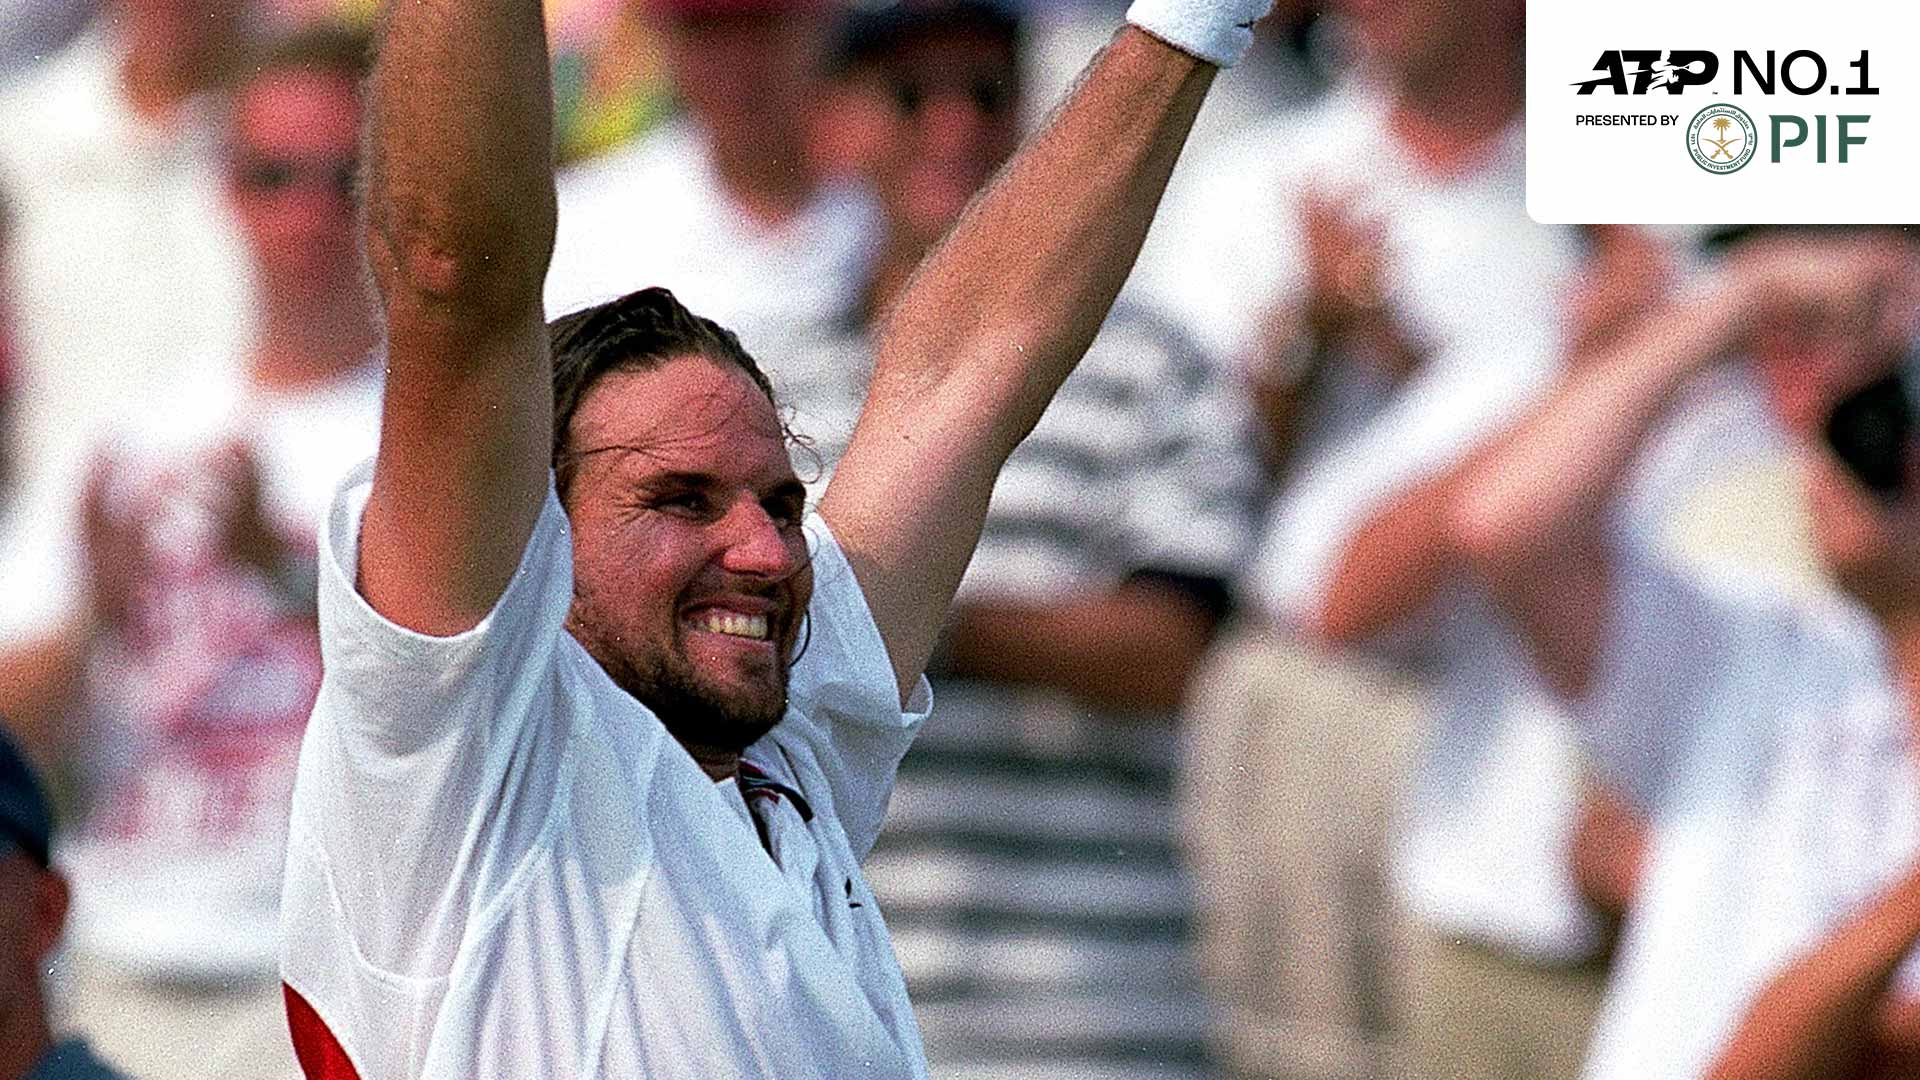 Patrick Rafter hit No. 1 in the PIF ATP Rankings on 26 July, 1999.